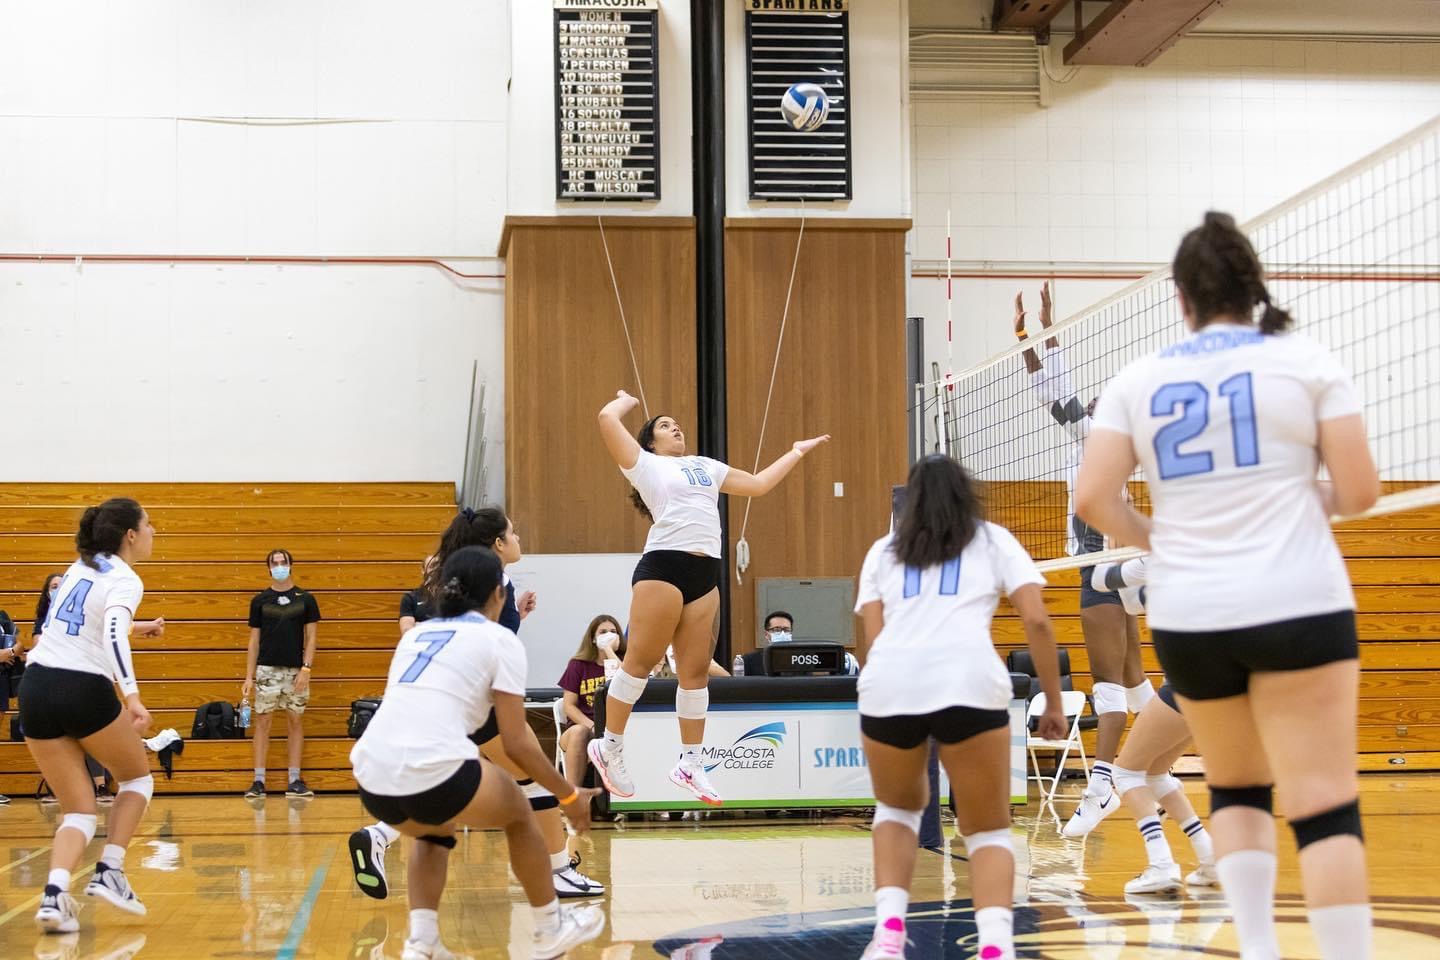 Sophomore Savannah So'oto jumps to hit a volleyball.